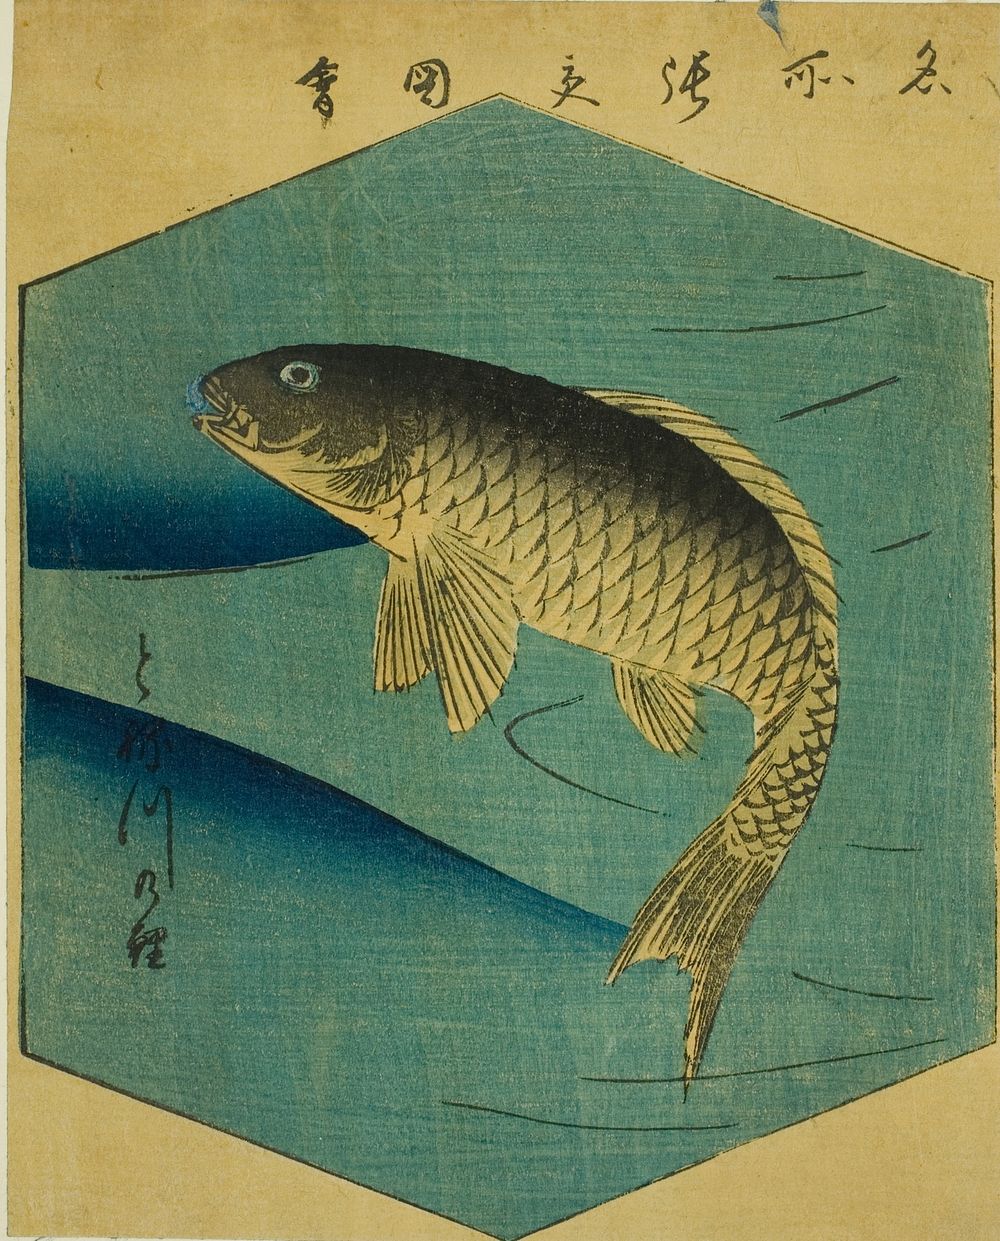 Carp in the Tone River (Tonegawa no koi), section of a sheet from the series "Cutout Pictures of Famous Places in Edo (Edo…